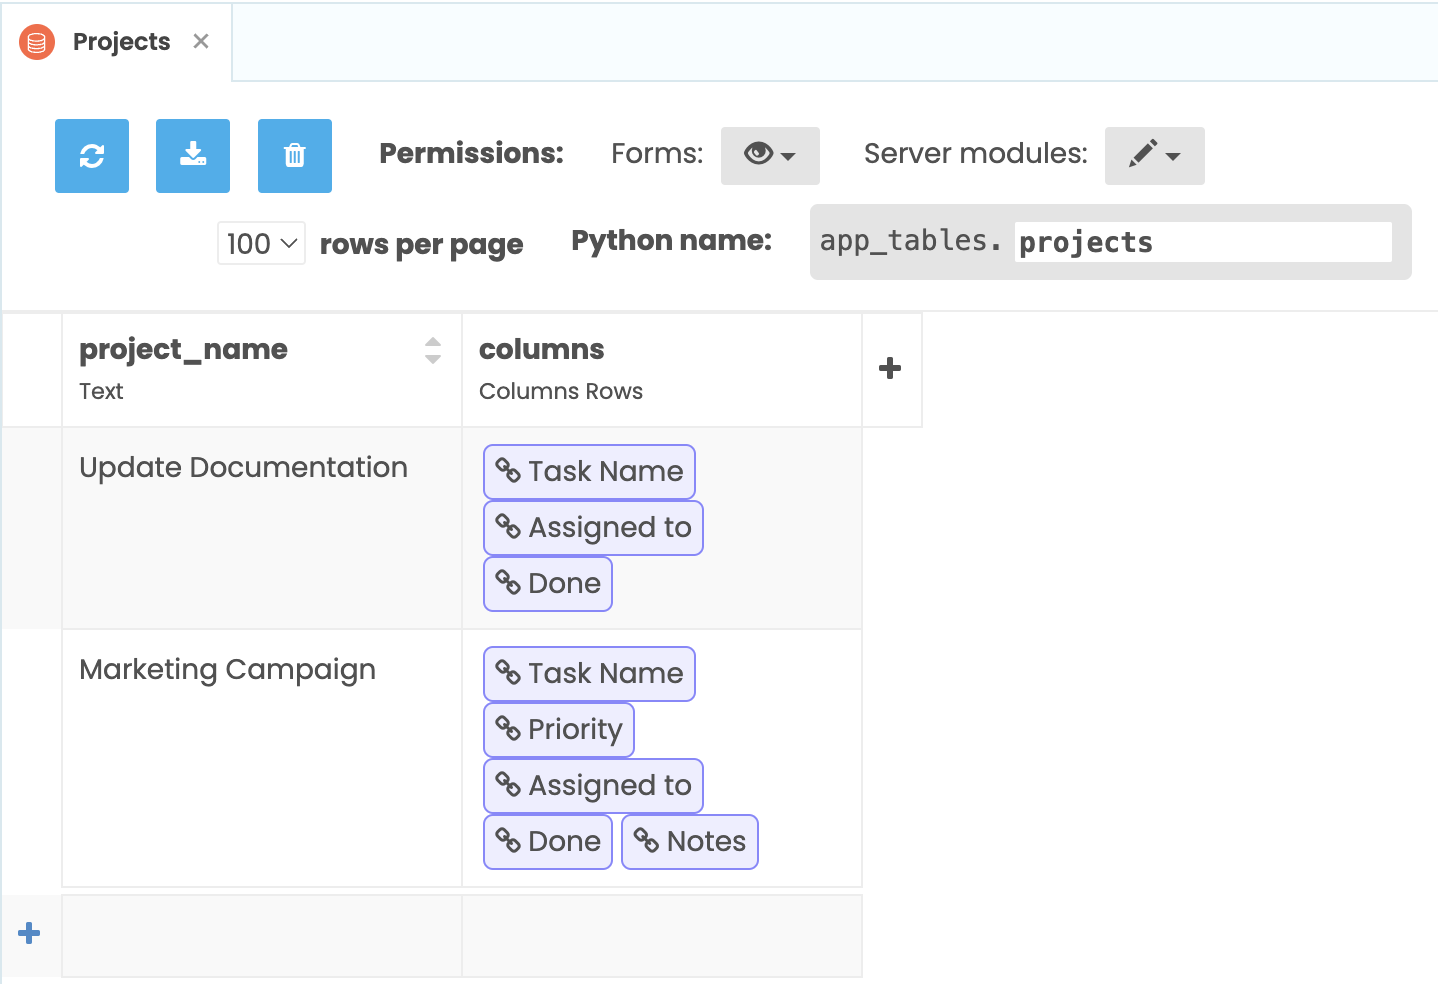 Screenshot of the Projects Data Table showing two columns:project_name and columns